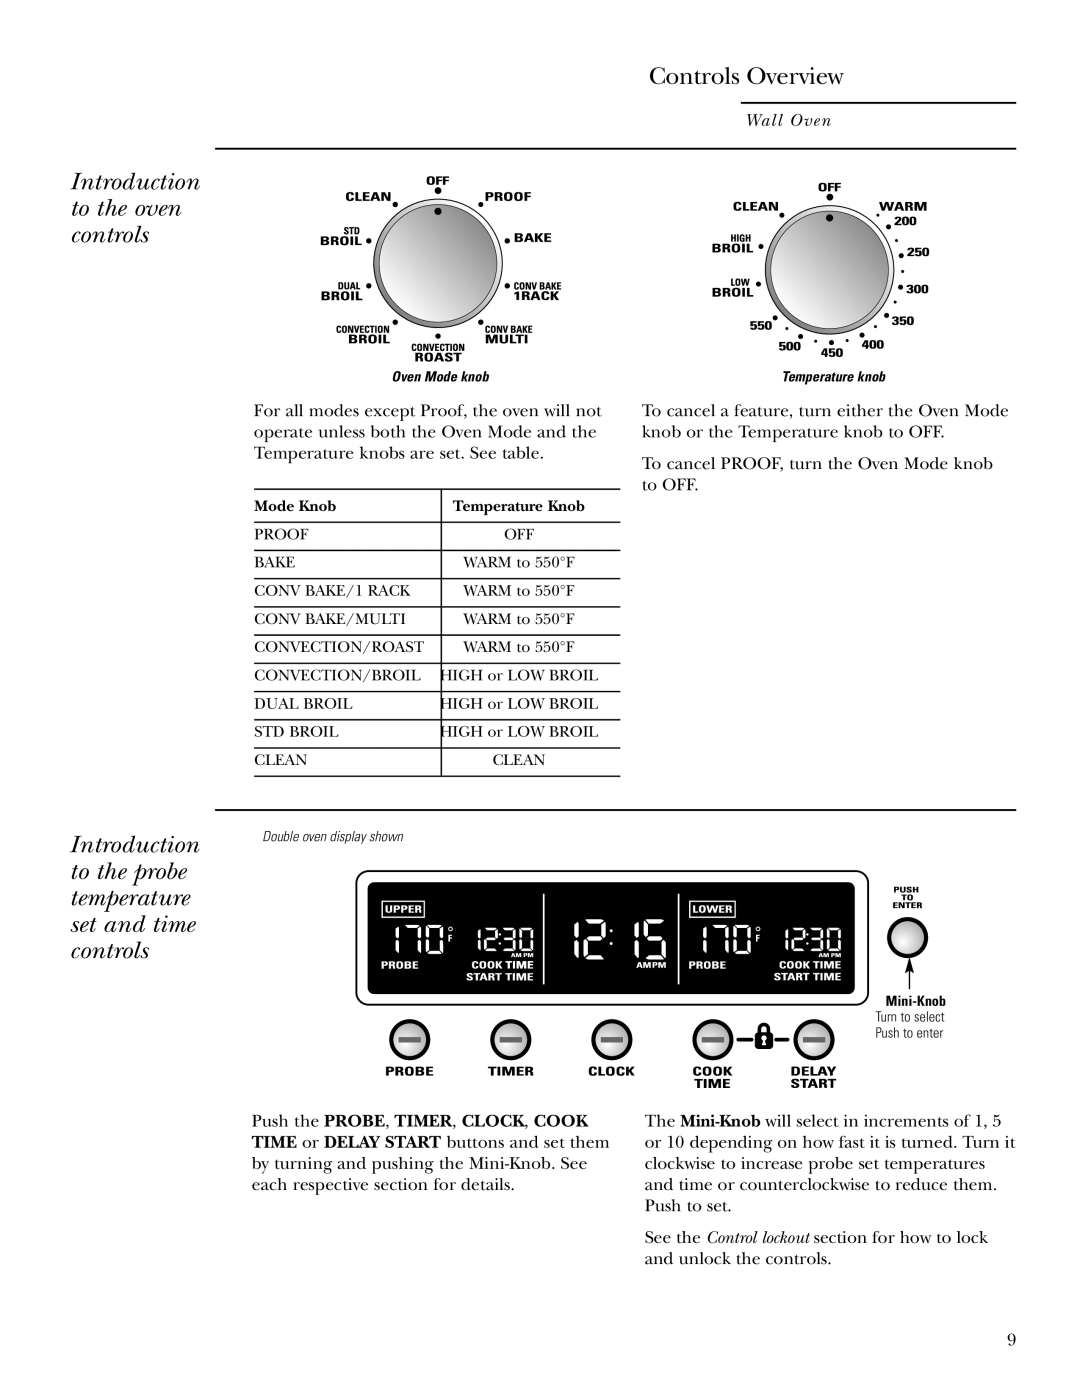 GE ZET1S Introduction to the oven controls, Introduction to the probe temperature set and time controls, Controls Overview 